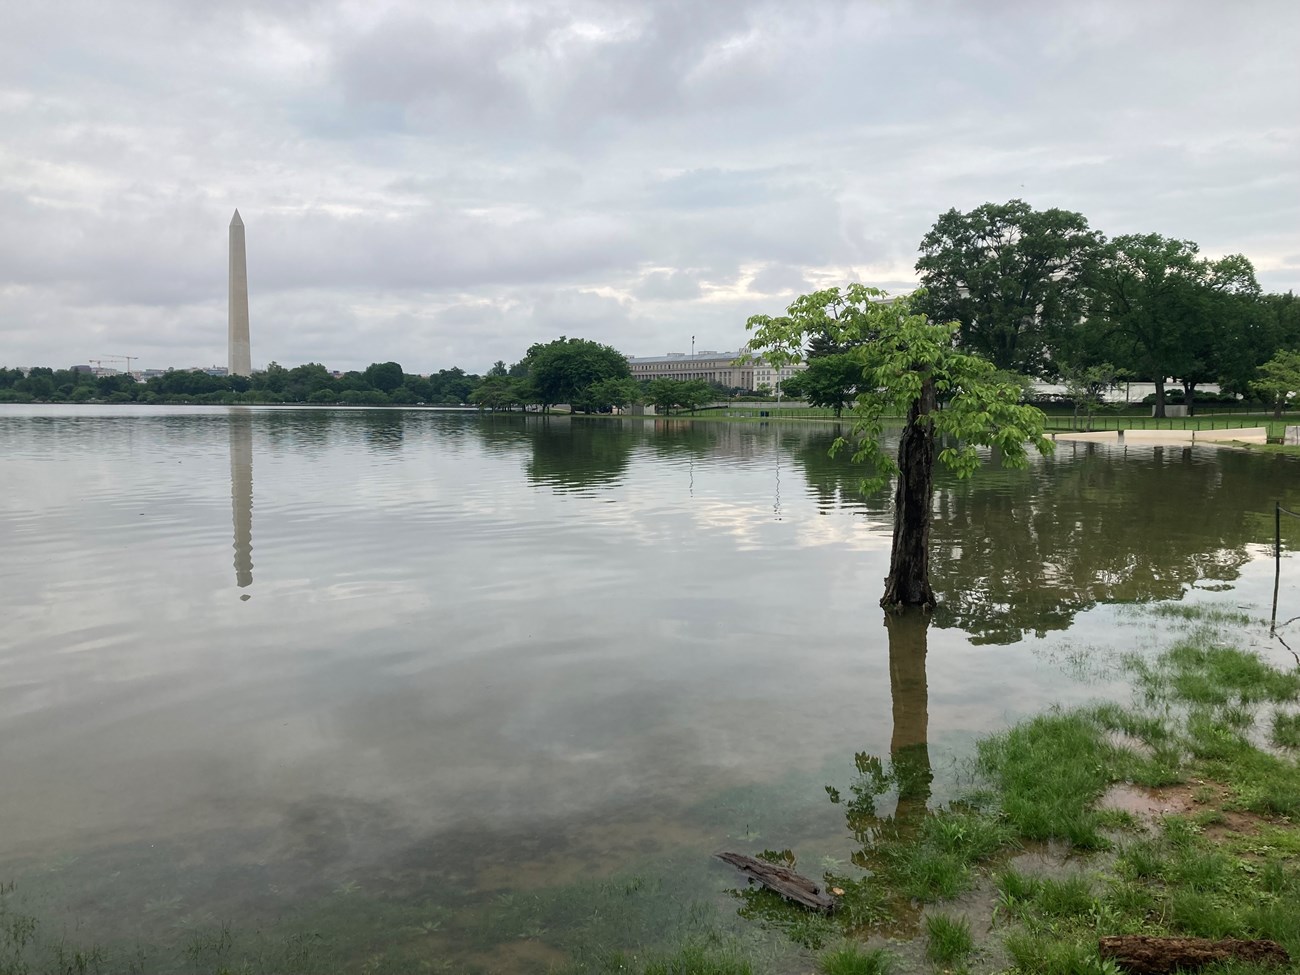 Standing water flooding grassy foreground areas on an overcast day with the Washington Monument visible in the background and a few green leafed out trees.